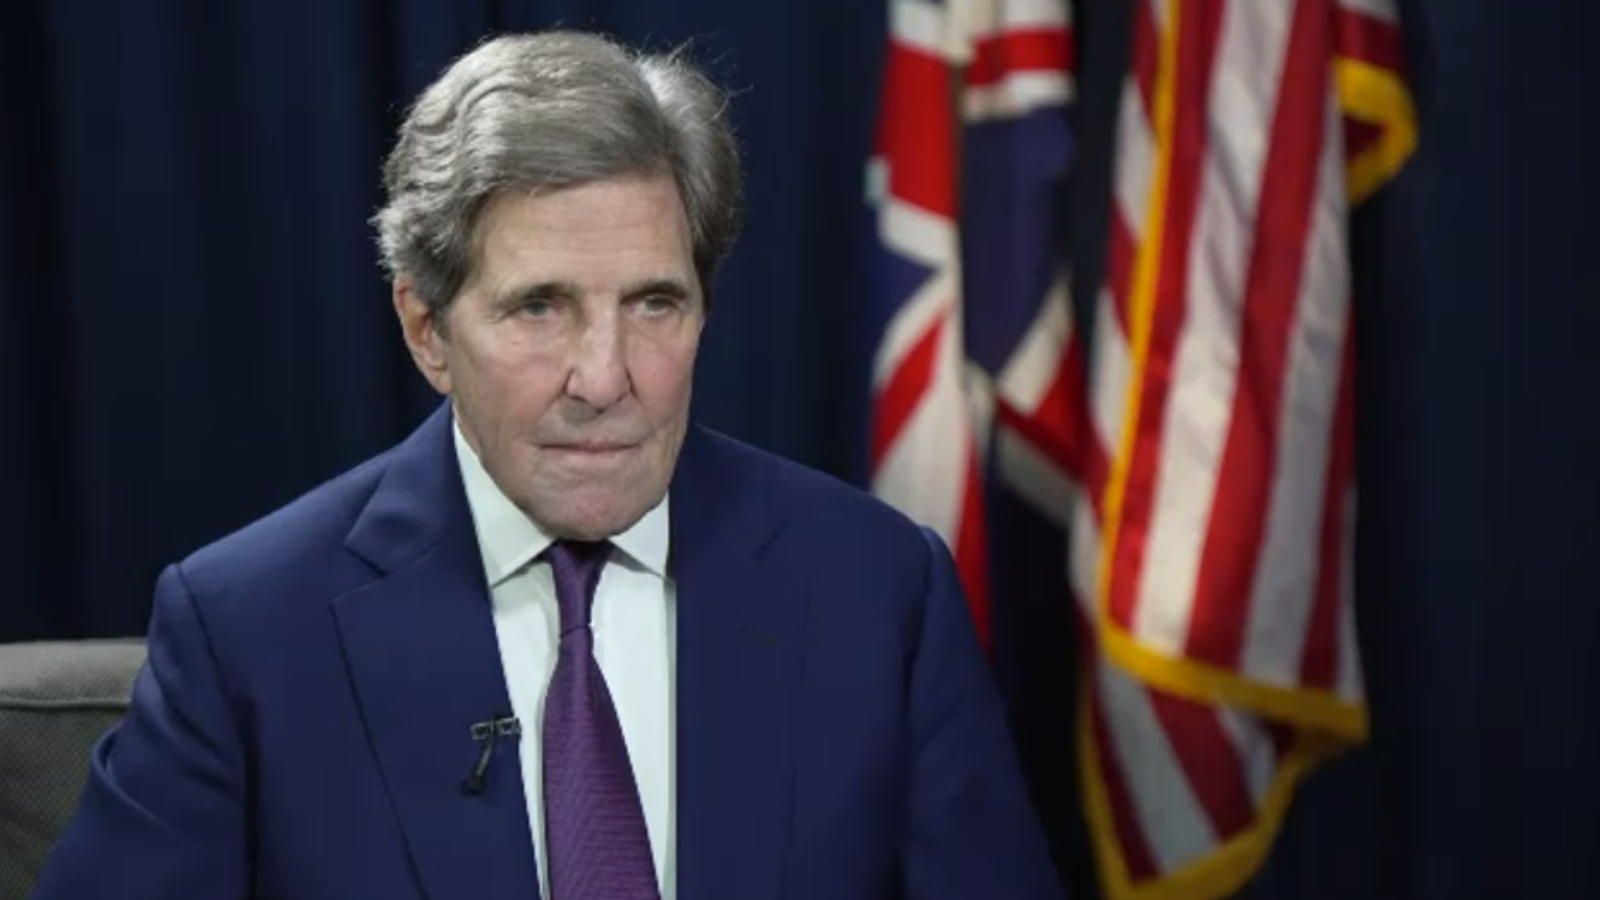 John Kerry says climate denial and disinformation is 'costly and dangerous'